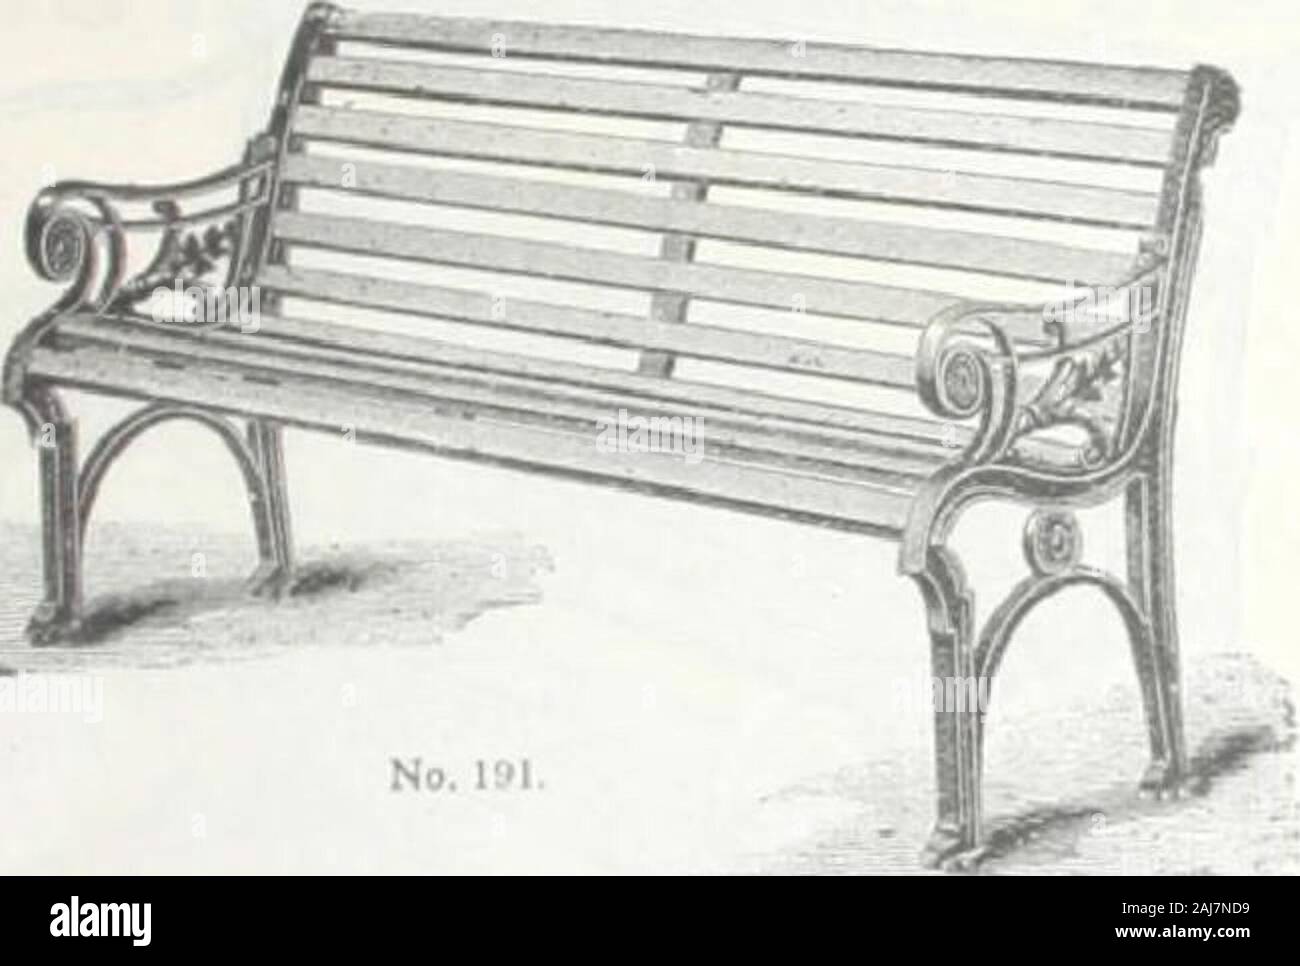 Wrinch & Sons garden furniture and requisites. . N c i promenade,, et. «h,cl * JJ largely usedI ,n | lent. Th. p;n&lt; and lhr REDUCED PEICB6J1 lards, pitch Deltch. Also supplied will. An. iol „ FootreiU lor ditto, G ft. 6 9 6 12 ft. 18 17 6 5 0 2 11 0 3 7 63 19 0 HEIGHT—ENTERIC Ar STATION EKS hall. 93 GARDEN OR PARK SEATS THE SIRDAR No.. I mis irill good. cry ica^onabic prue. L.i jtinc, vaffi arrJ I PRIfc In 0 * # THE MARLBOROUGH. Stock Photo